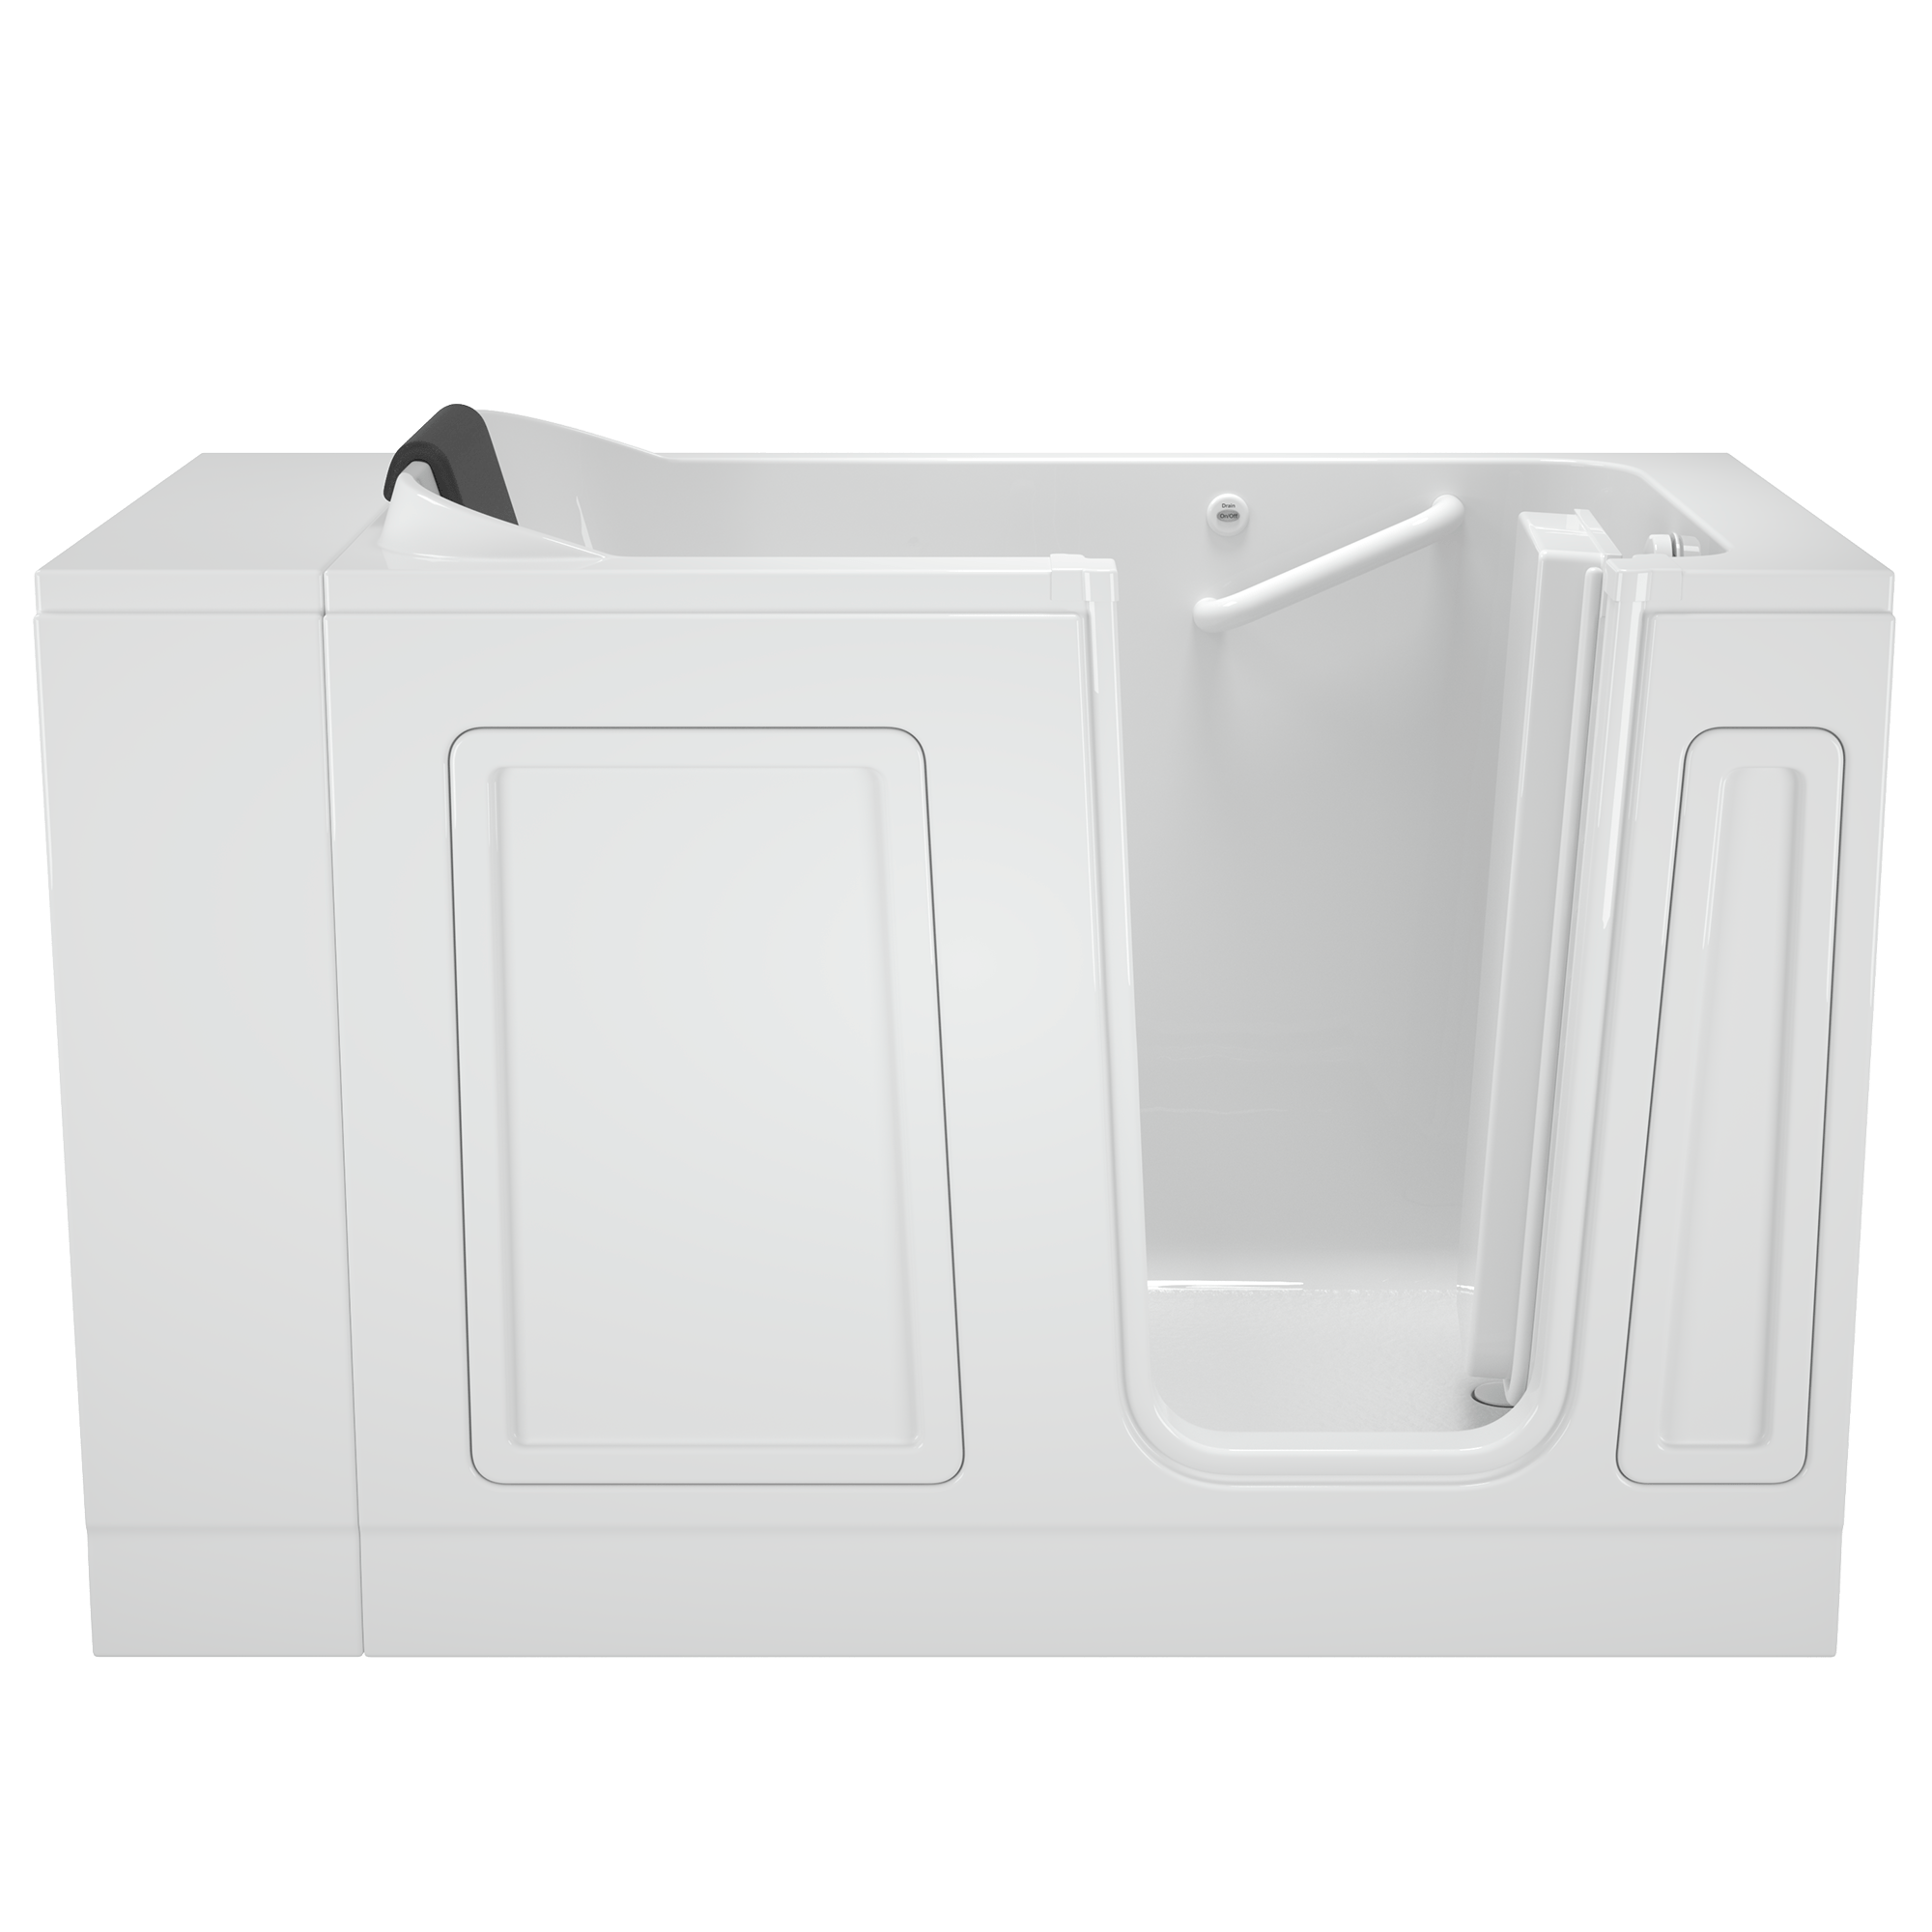 Acrylic Luxury Series 30 x 51 -Inch Walk-in Tub With Soaker System - Right-Hand Drain